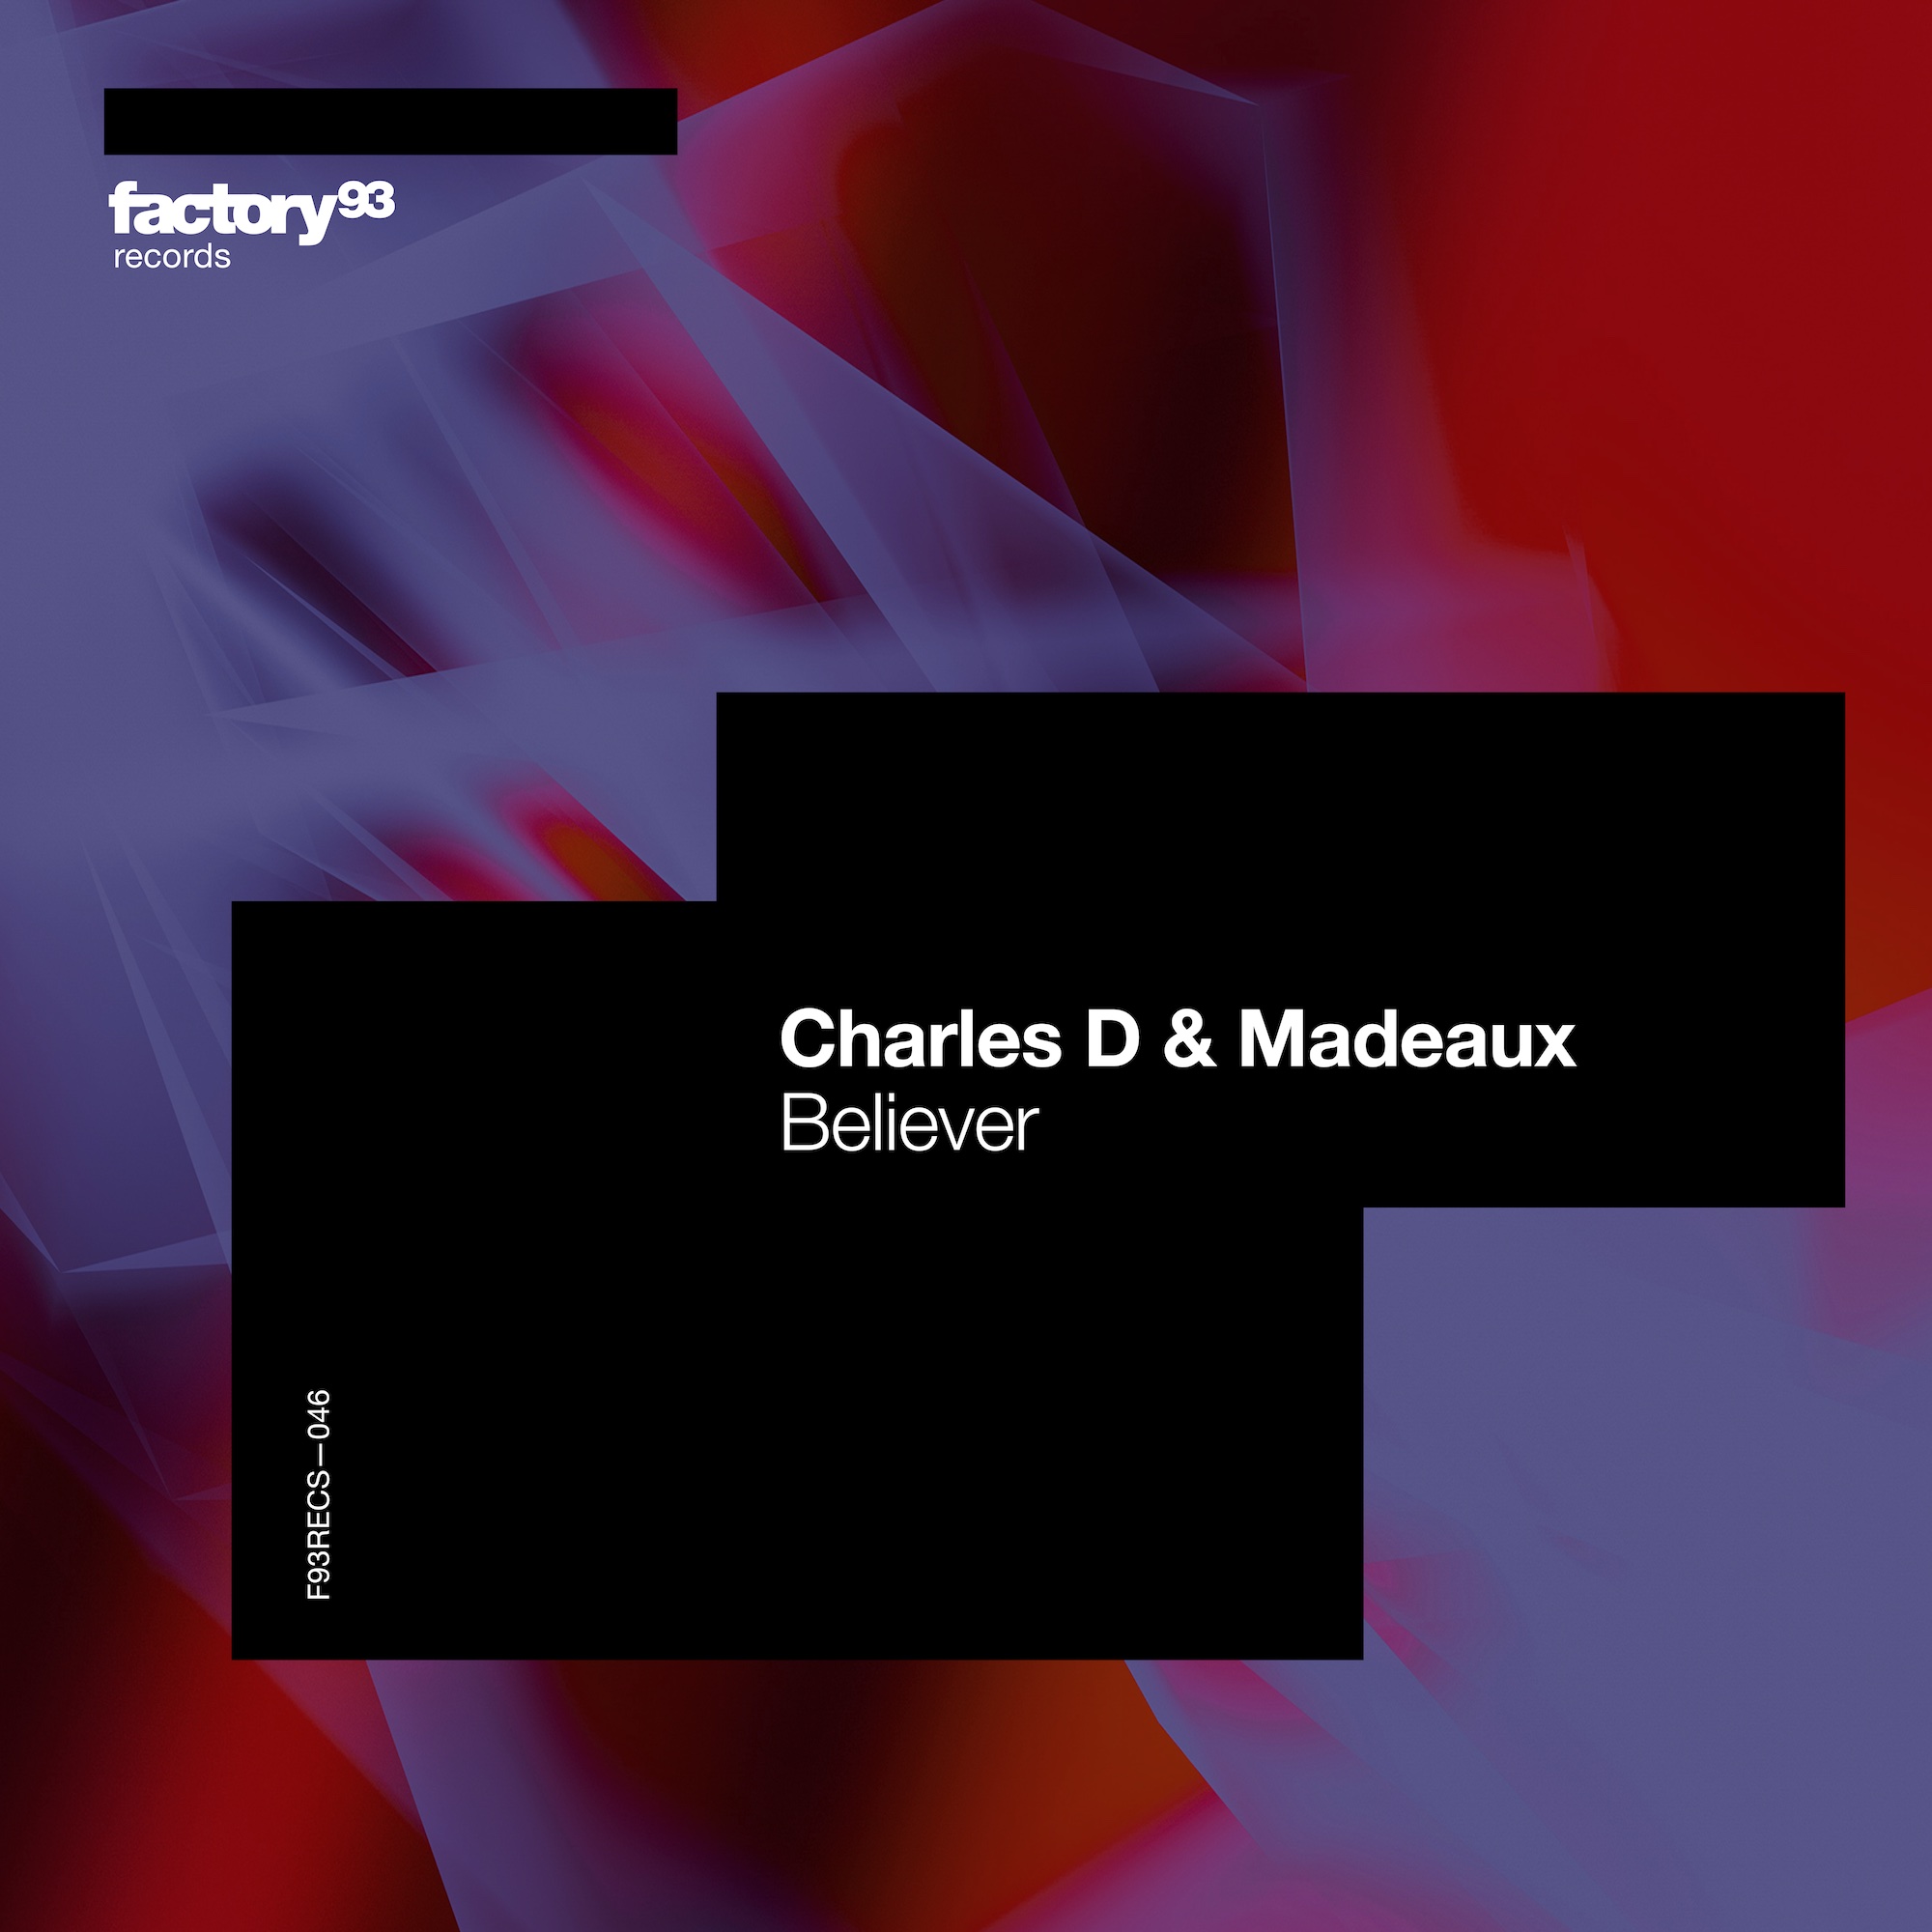 Charles D & Madeaux – Believer